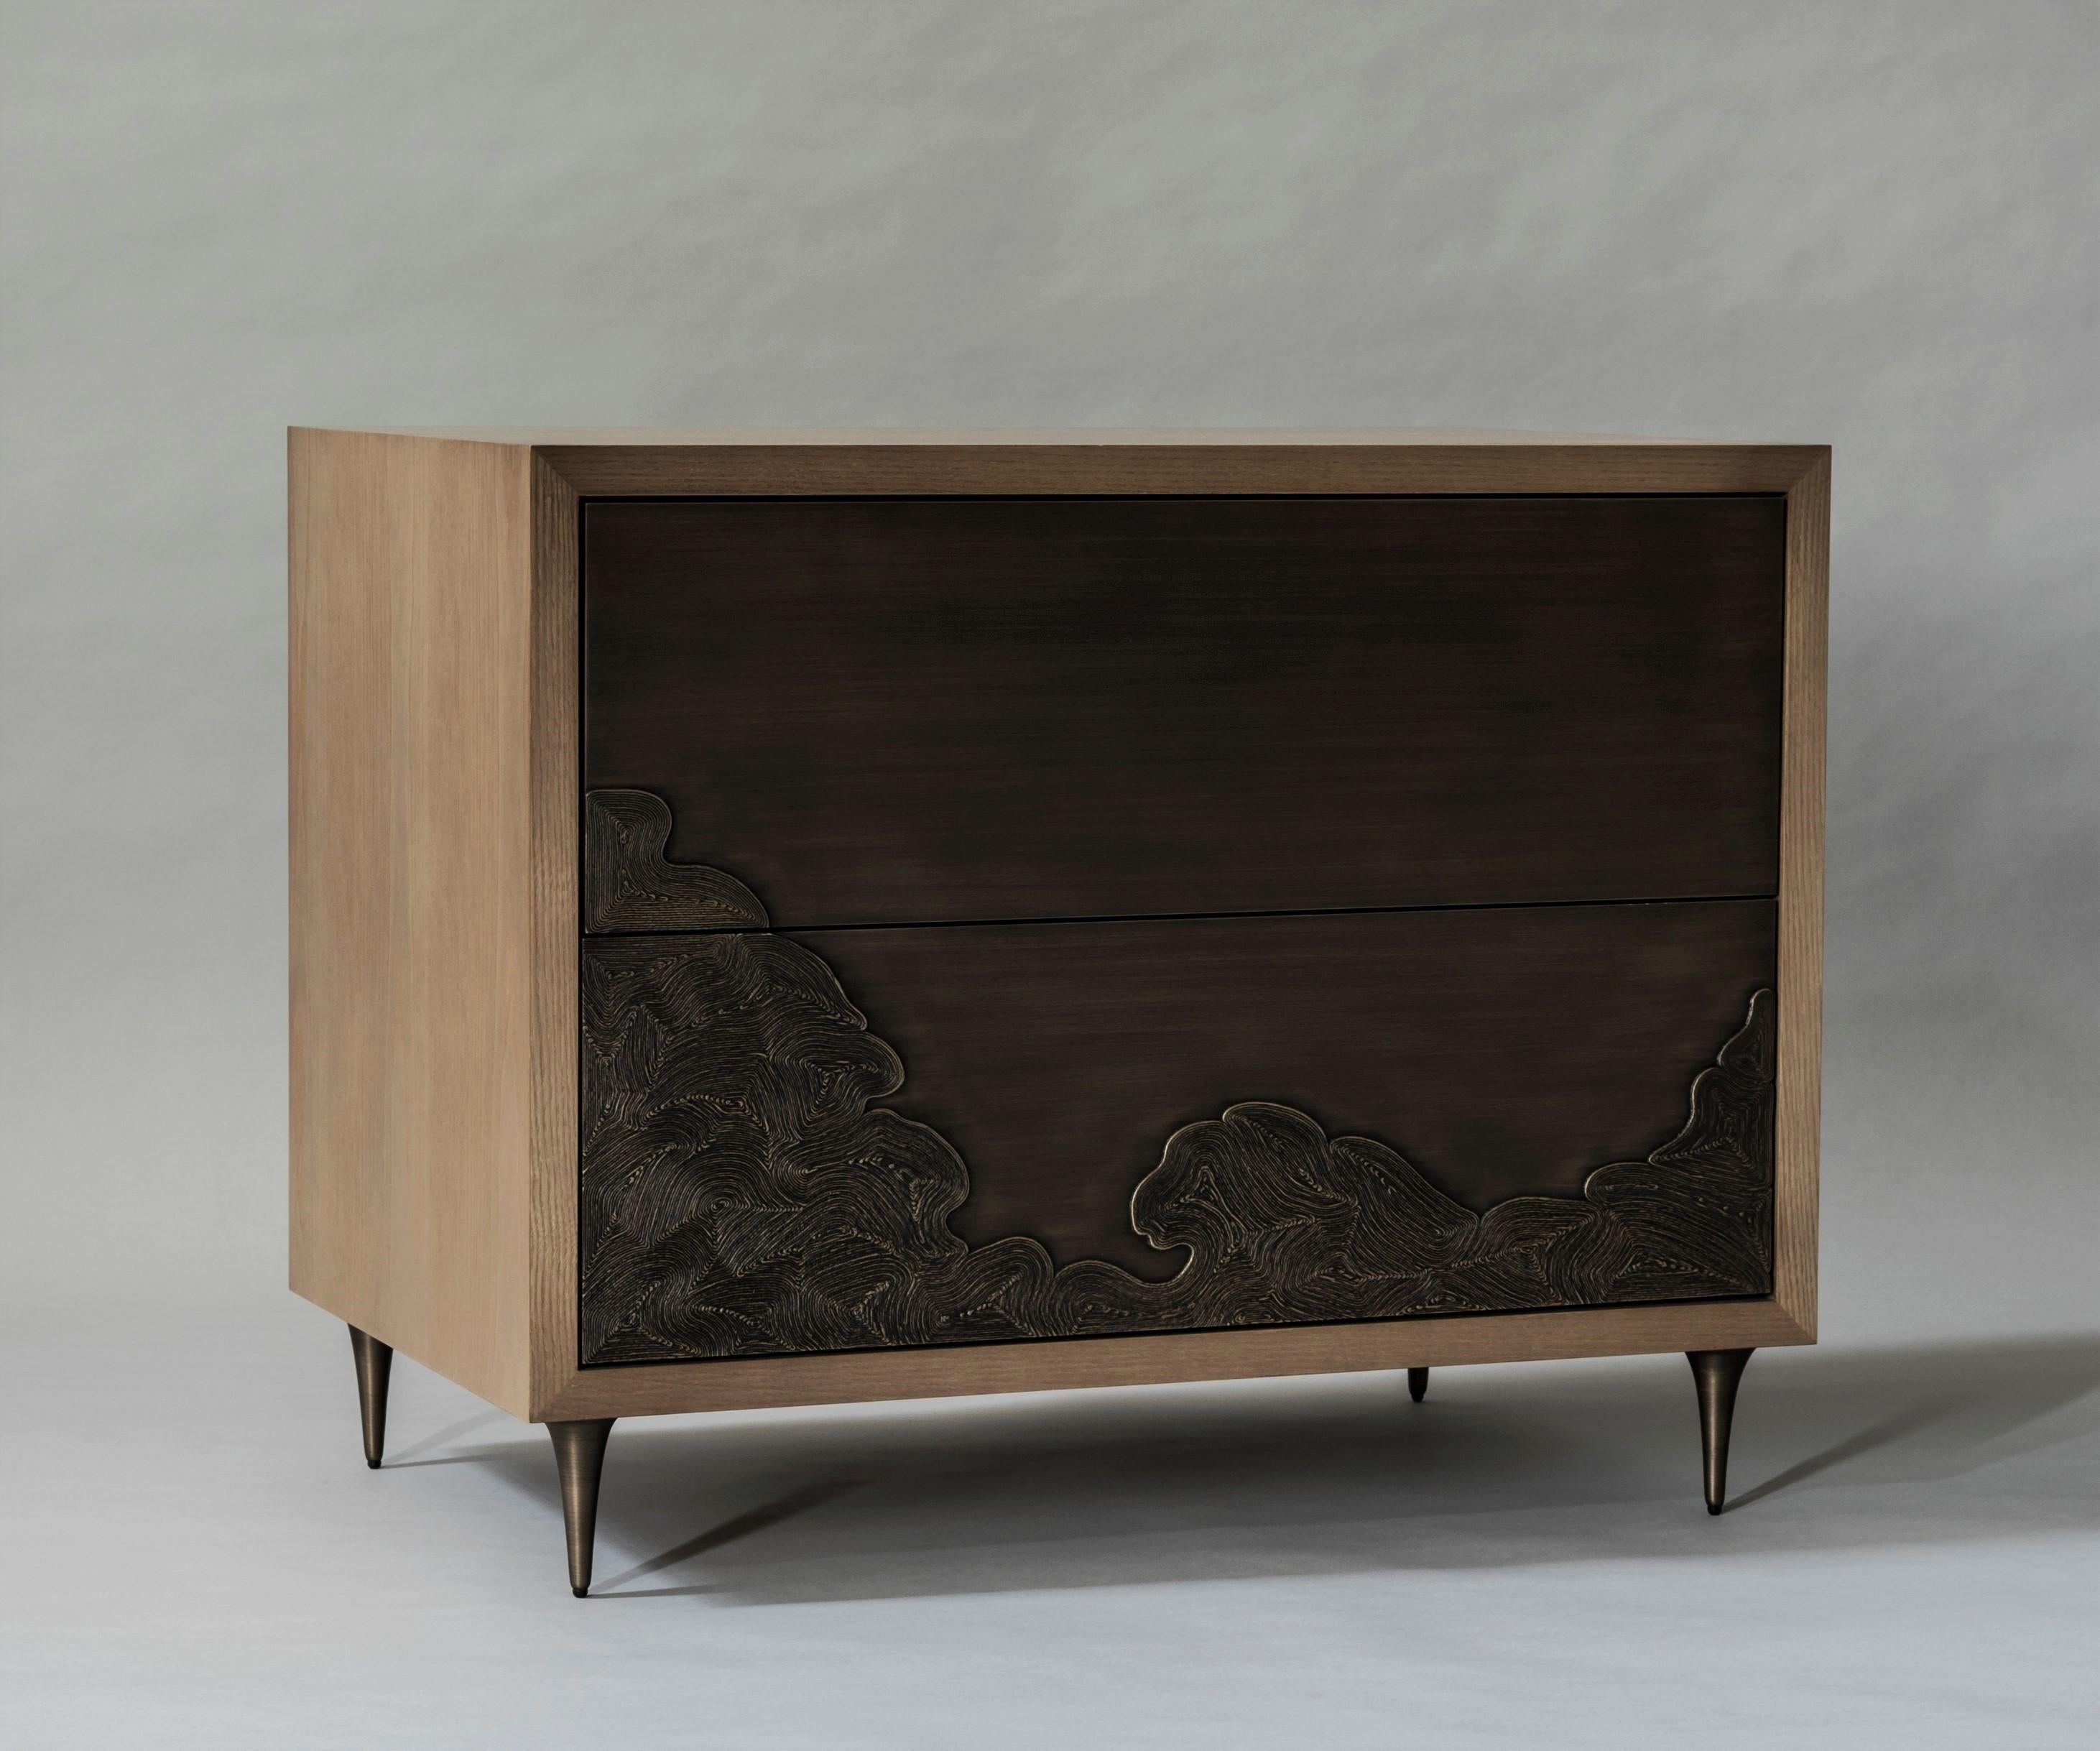 Named after the Japanese word for wave, the Nami Collection showcases bronzework in the form of swelling surf. The bedside table’s richly textured, push-to-open drawer fronts were cast using coiled thread - a nod to the ancient Dhokra creations of